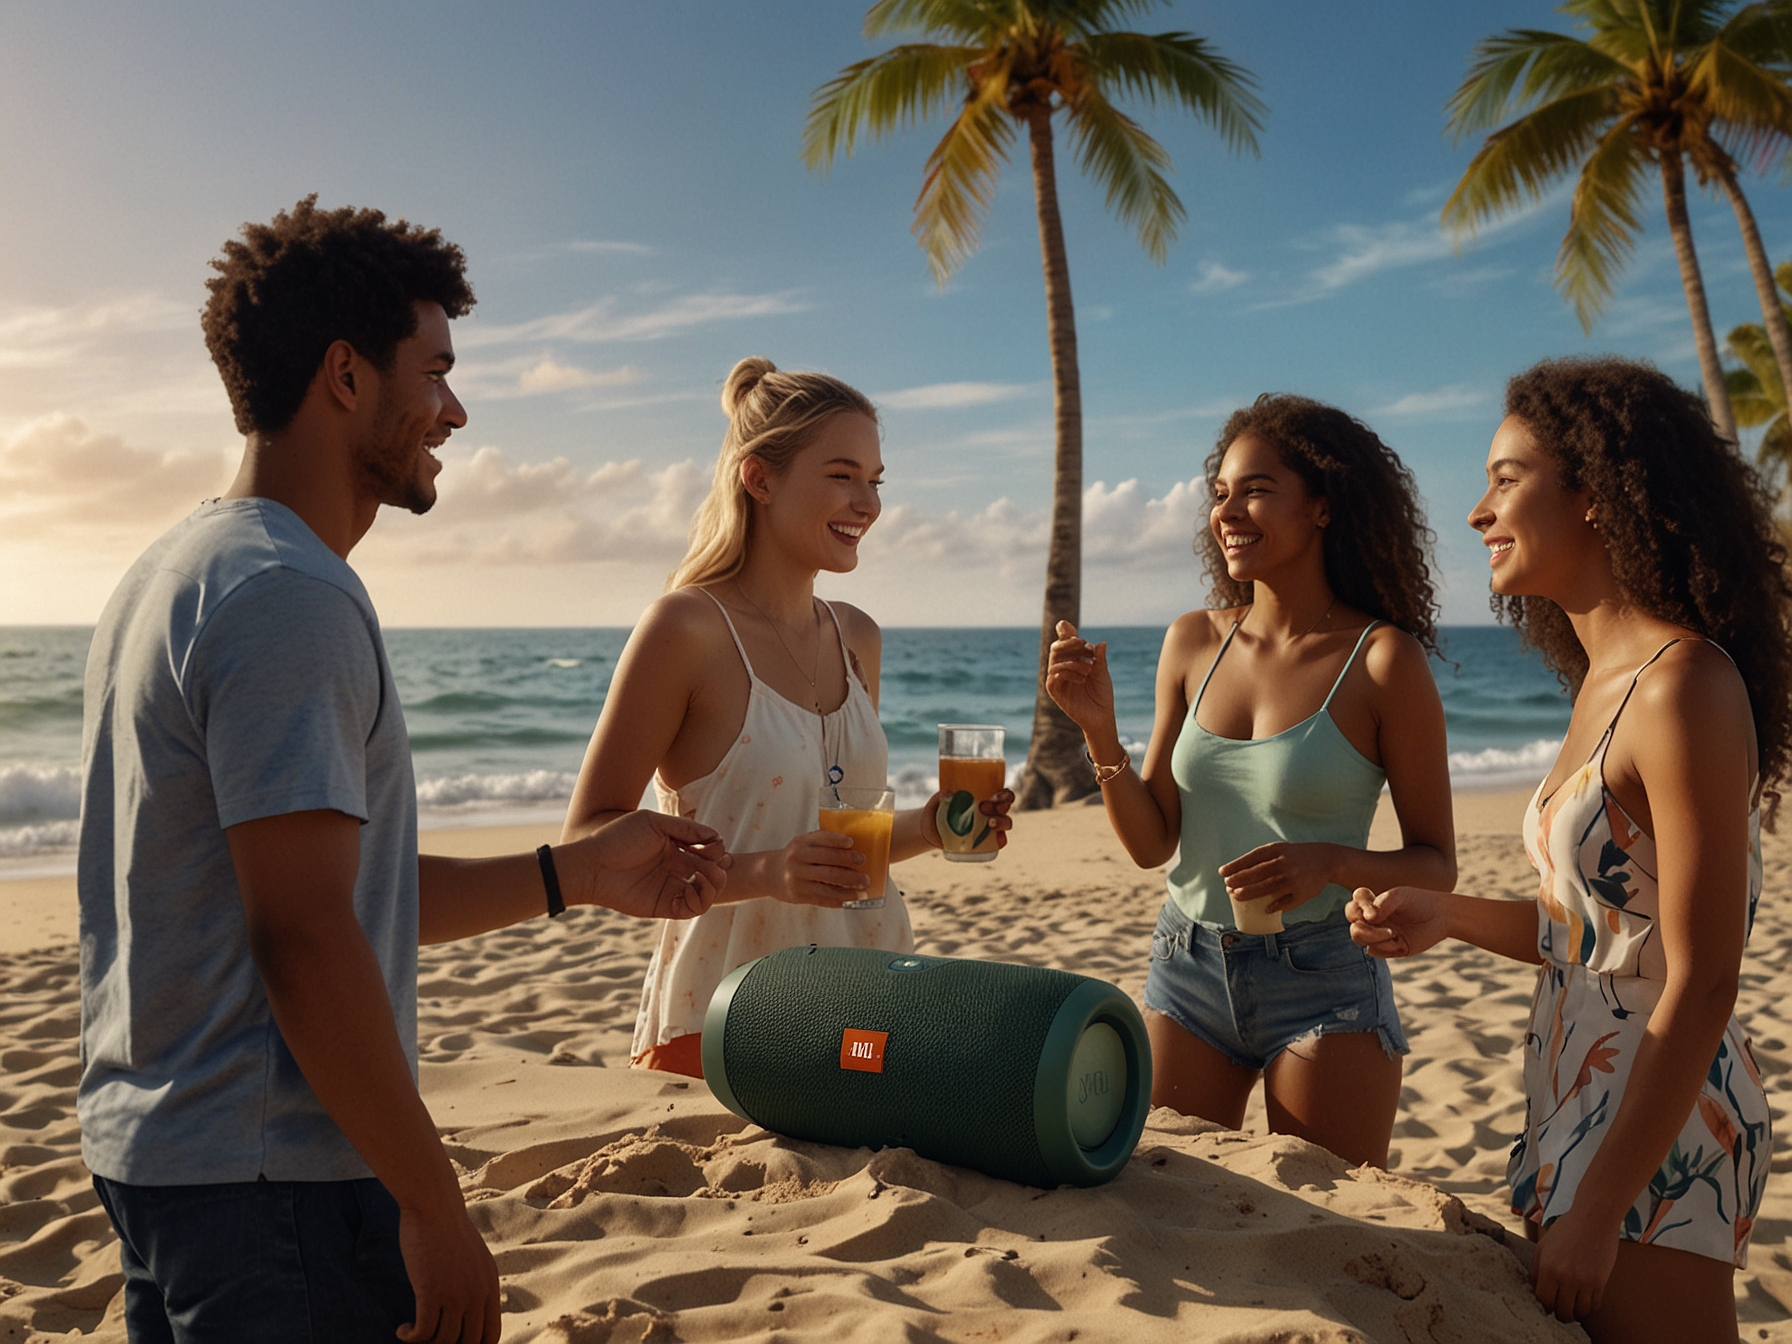 A group of friends enjoy a beach party with the JBL Flip 6 speaker, highlighting its portable design, powerful audio output, and durability in outdoor summer settings.